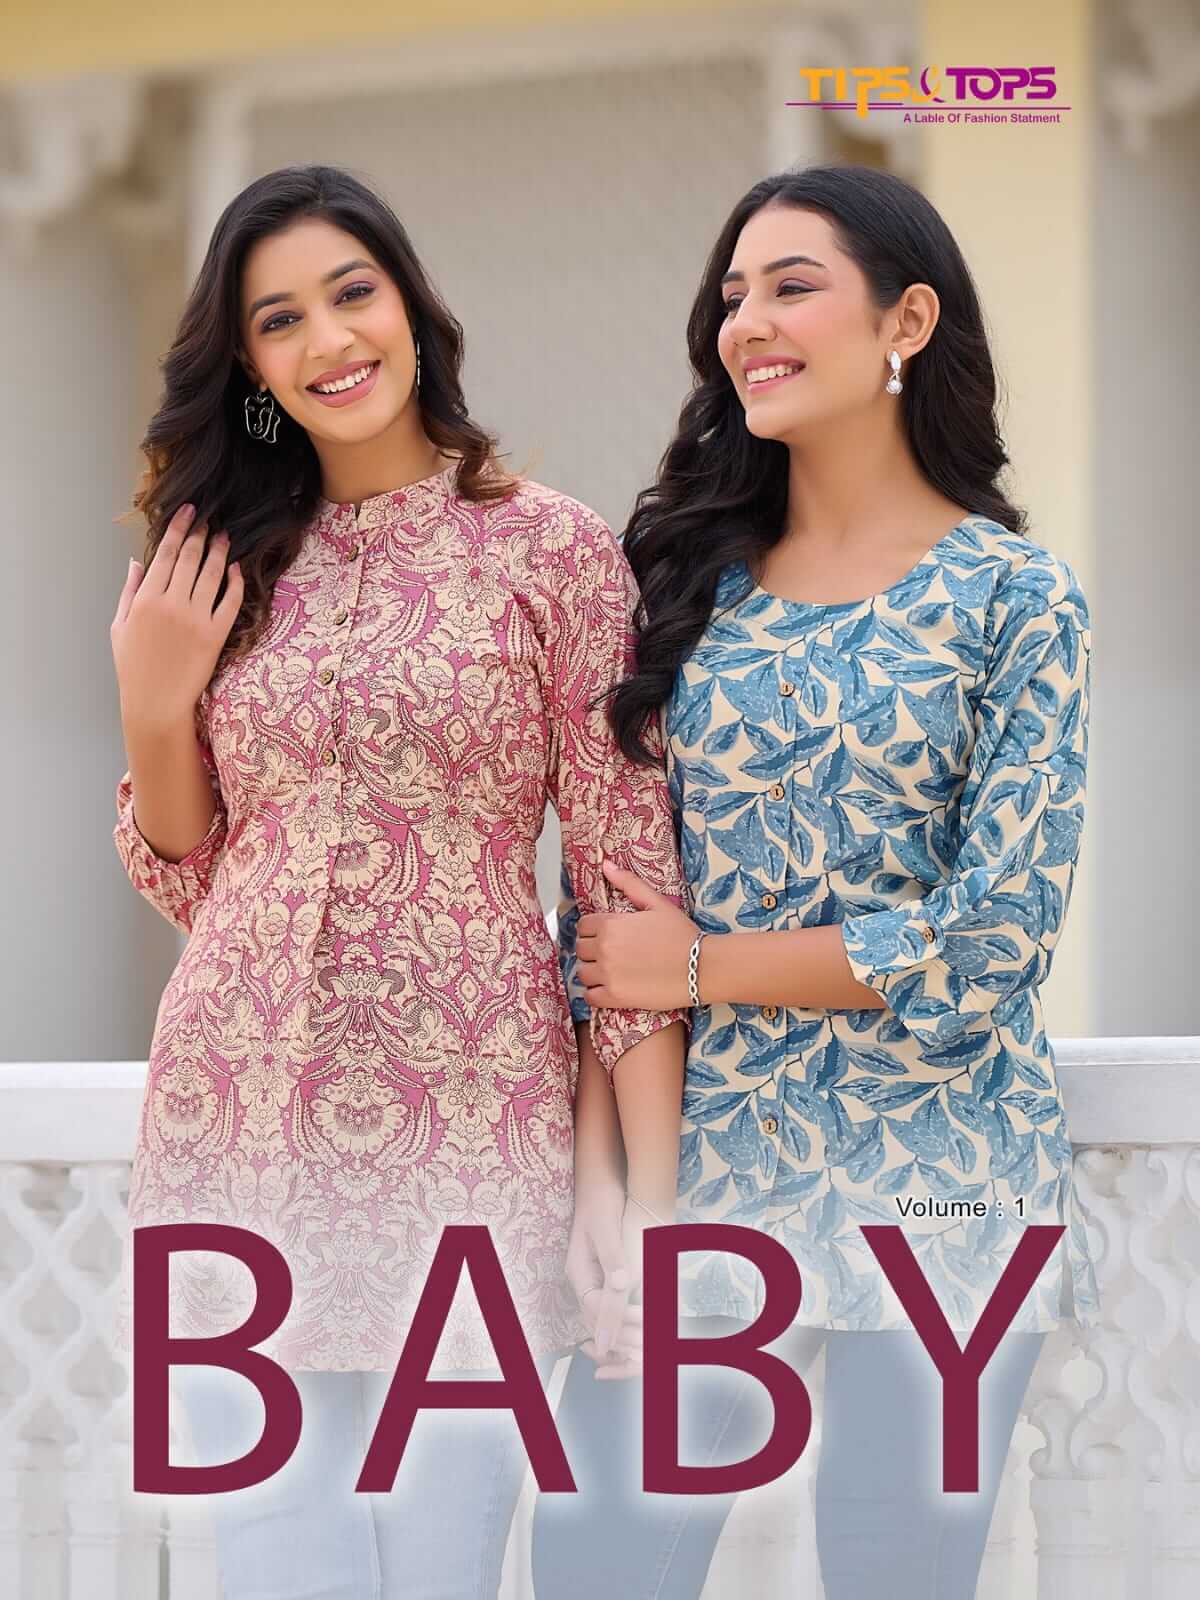 Tips Tops Baby Short Ladies Tops Catalog collection 8